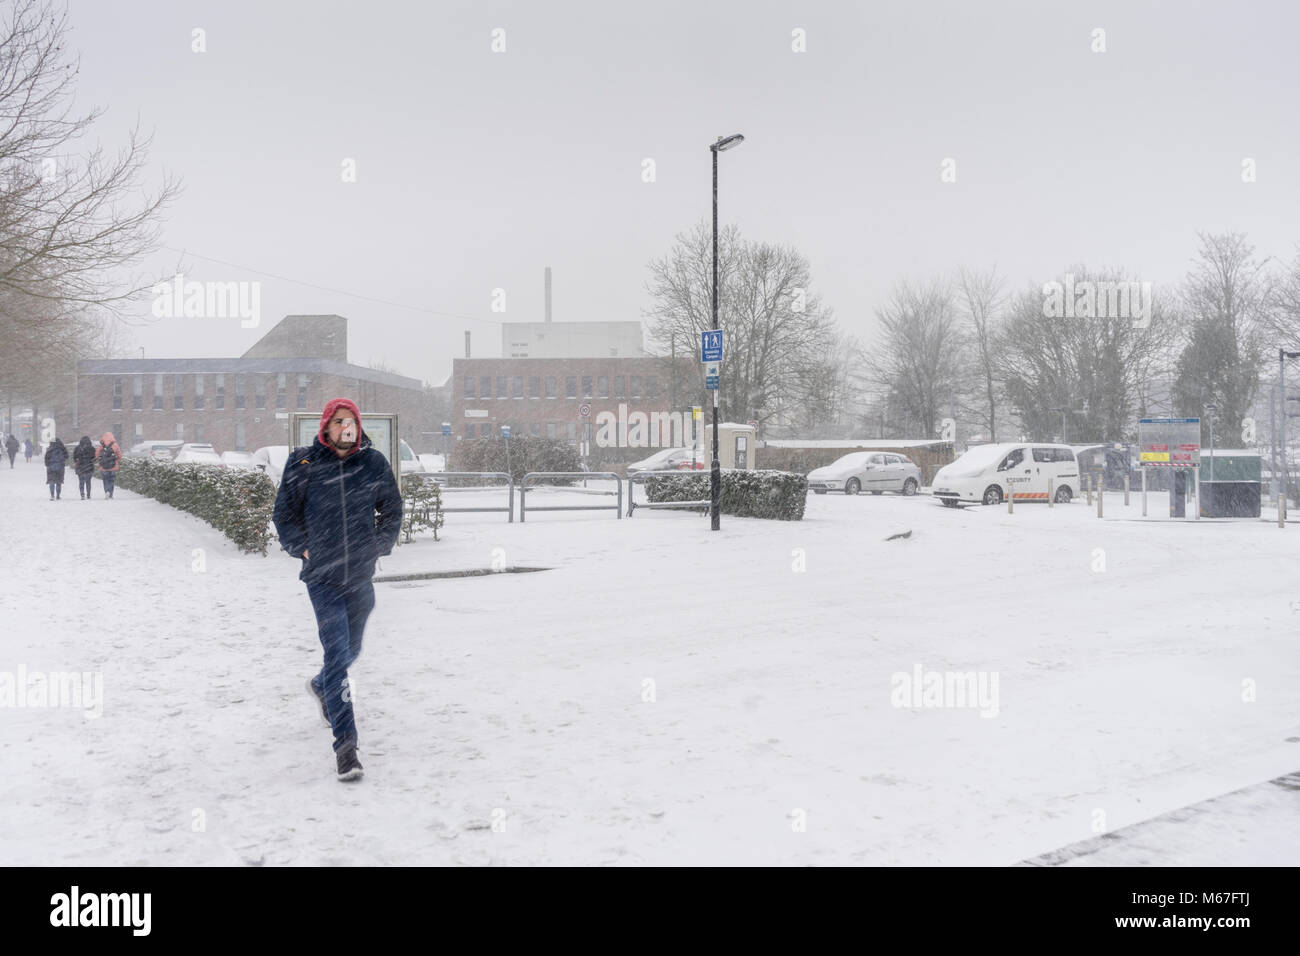 Southampton, UK. 1st of March 2018. Heavy snow has caused the University of Southampton (England, UK) to shut down for business for the rest of the day as well as tomorrow due to adverse and hazardous weather conditions . Stock Photo